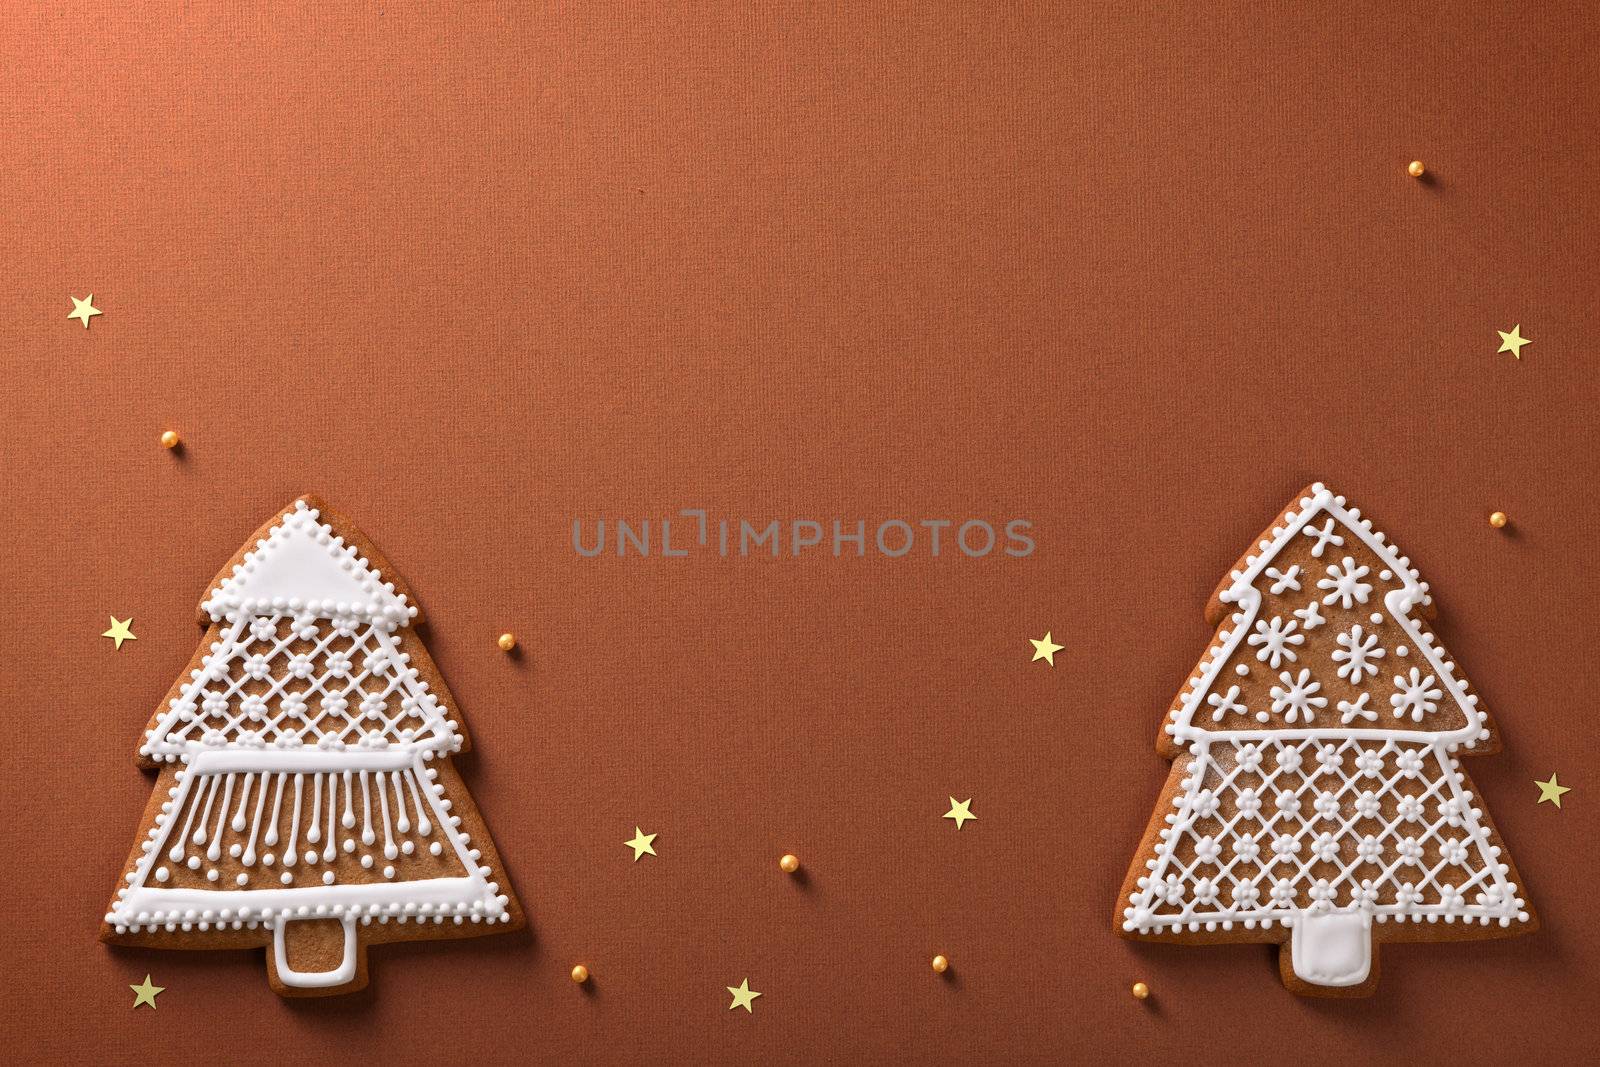 Christmas gingerbread trees composition with golden stars and balls on brown paper background